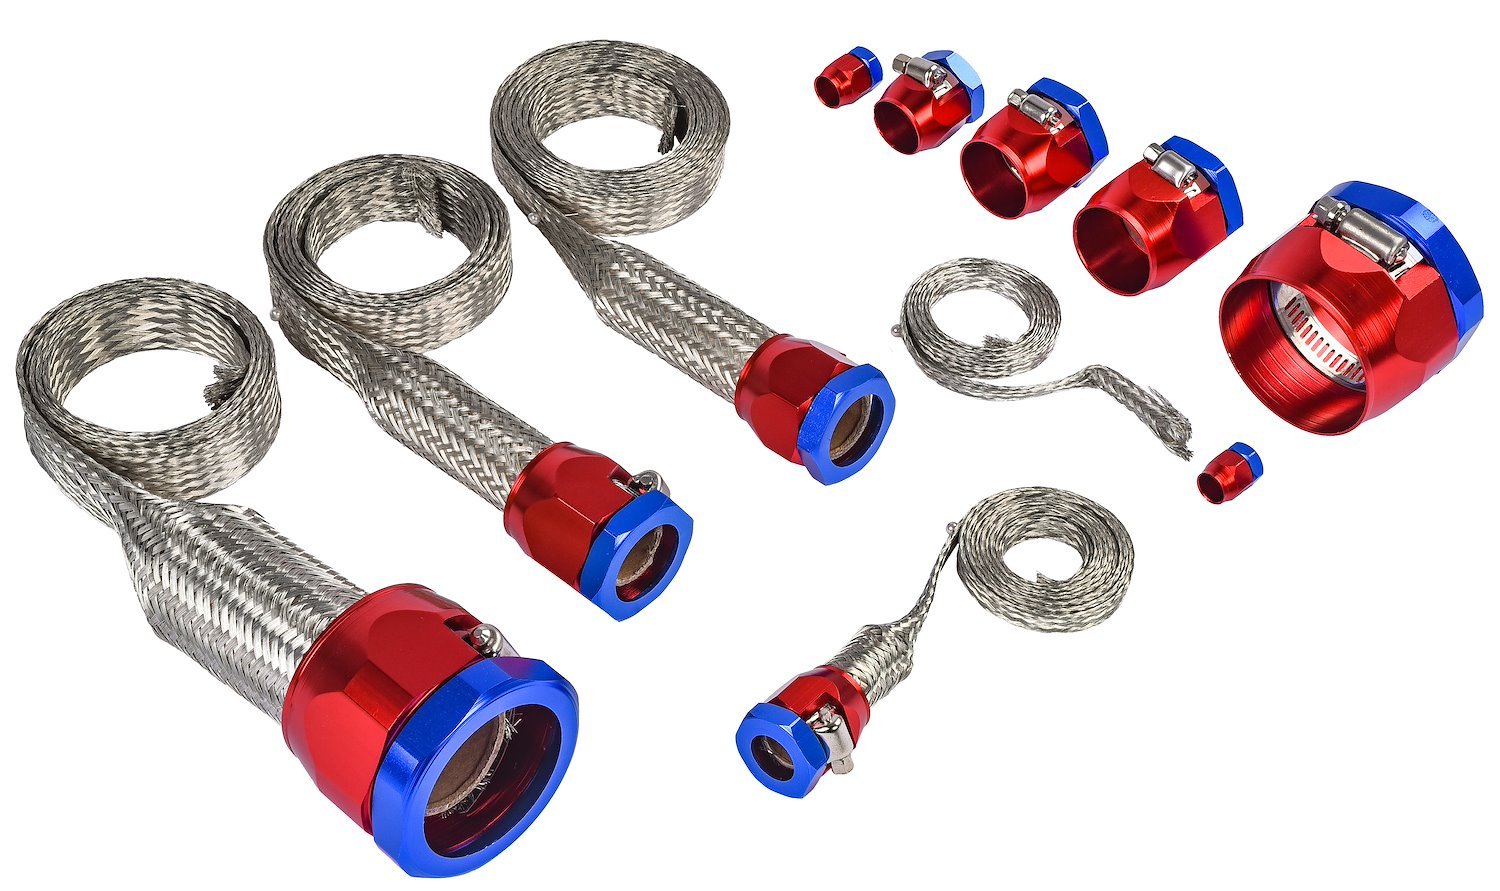 Braided Hose Sleeving Kit with Clamps [Red and Blue Anodized Hose Clamp Covers]